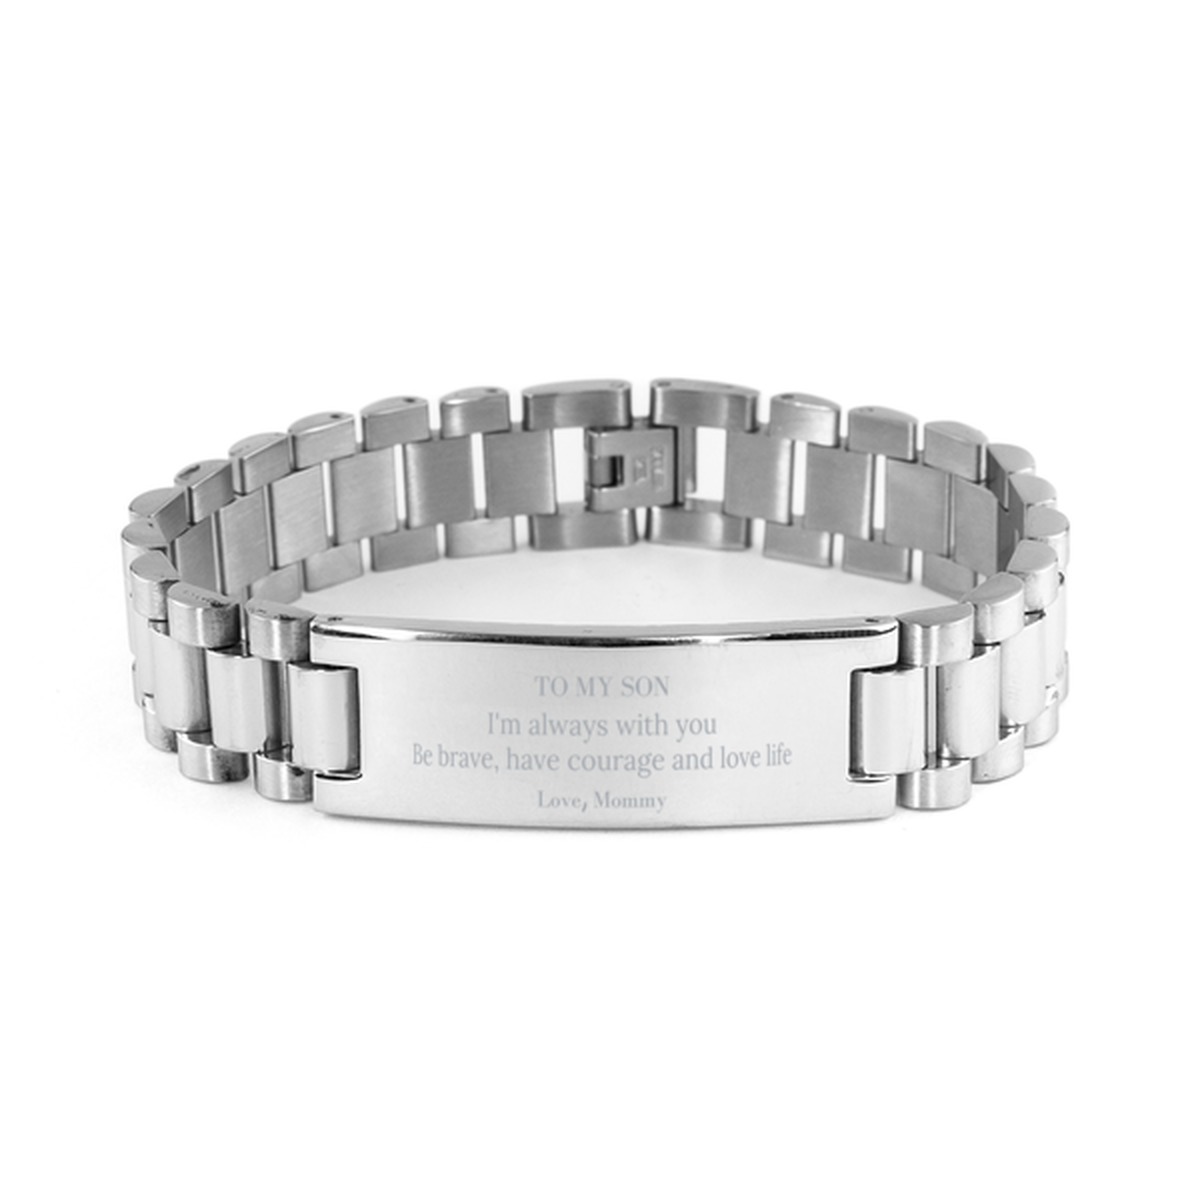 To My Son Gifts from Mommy, Unique Ladder Stainless Steel Bracelet Inspirational Christmas Birthday Graduation Gifts for Son I'm always with you. Be brave, have courage and love life. Love, Mommy